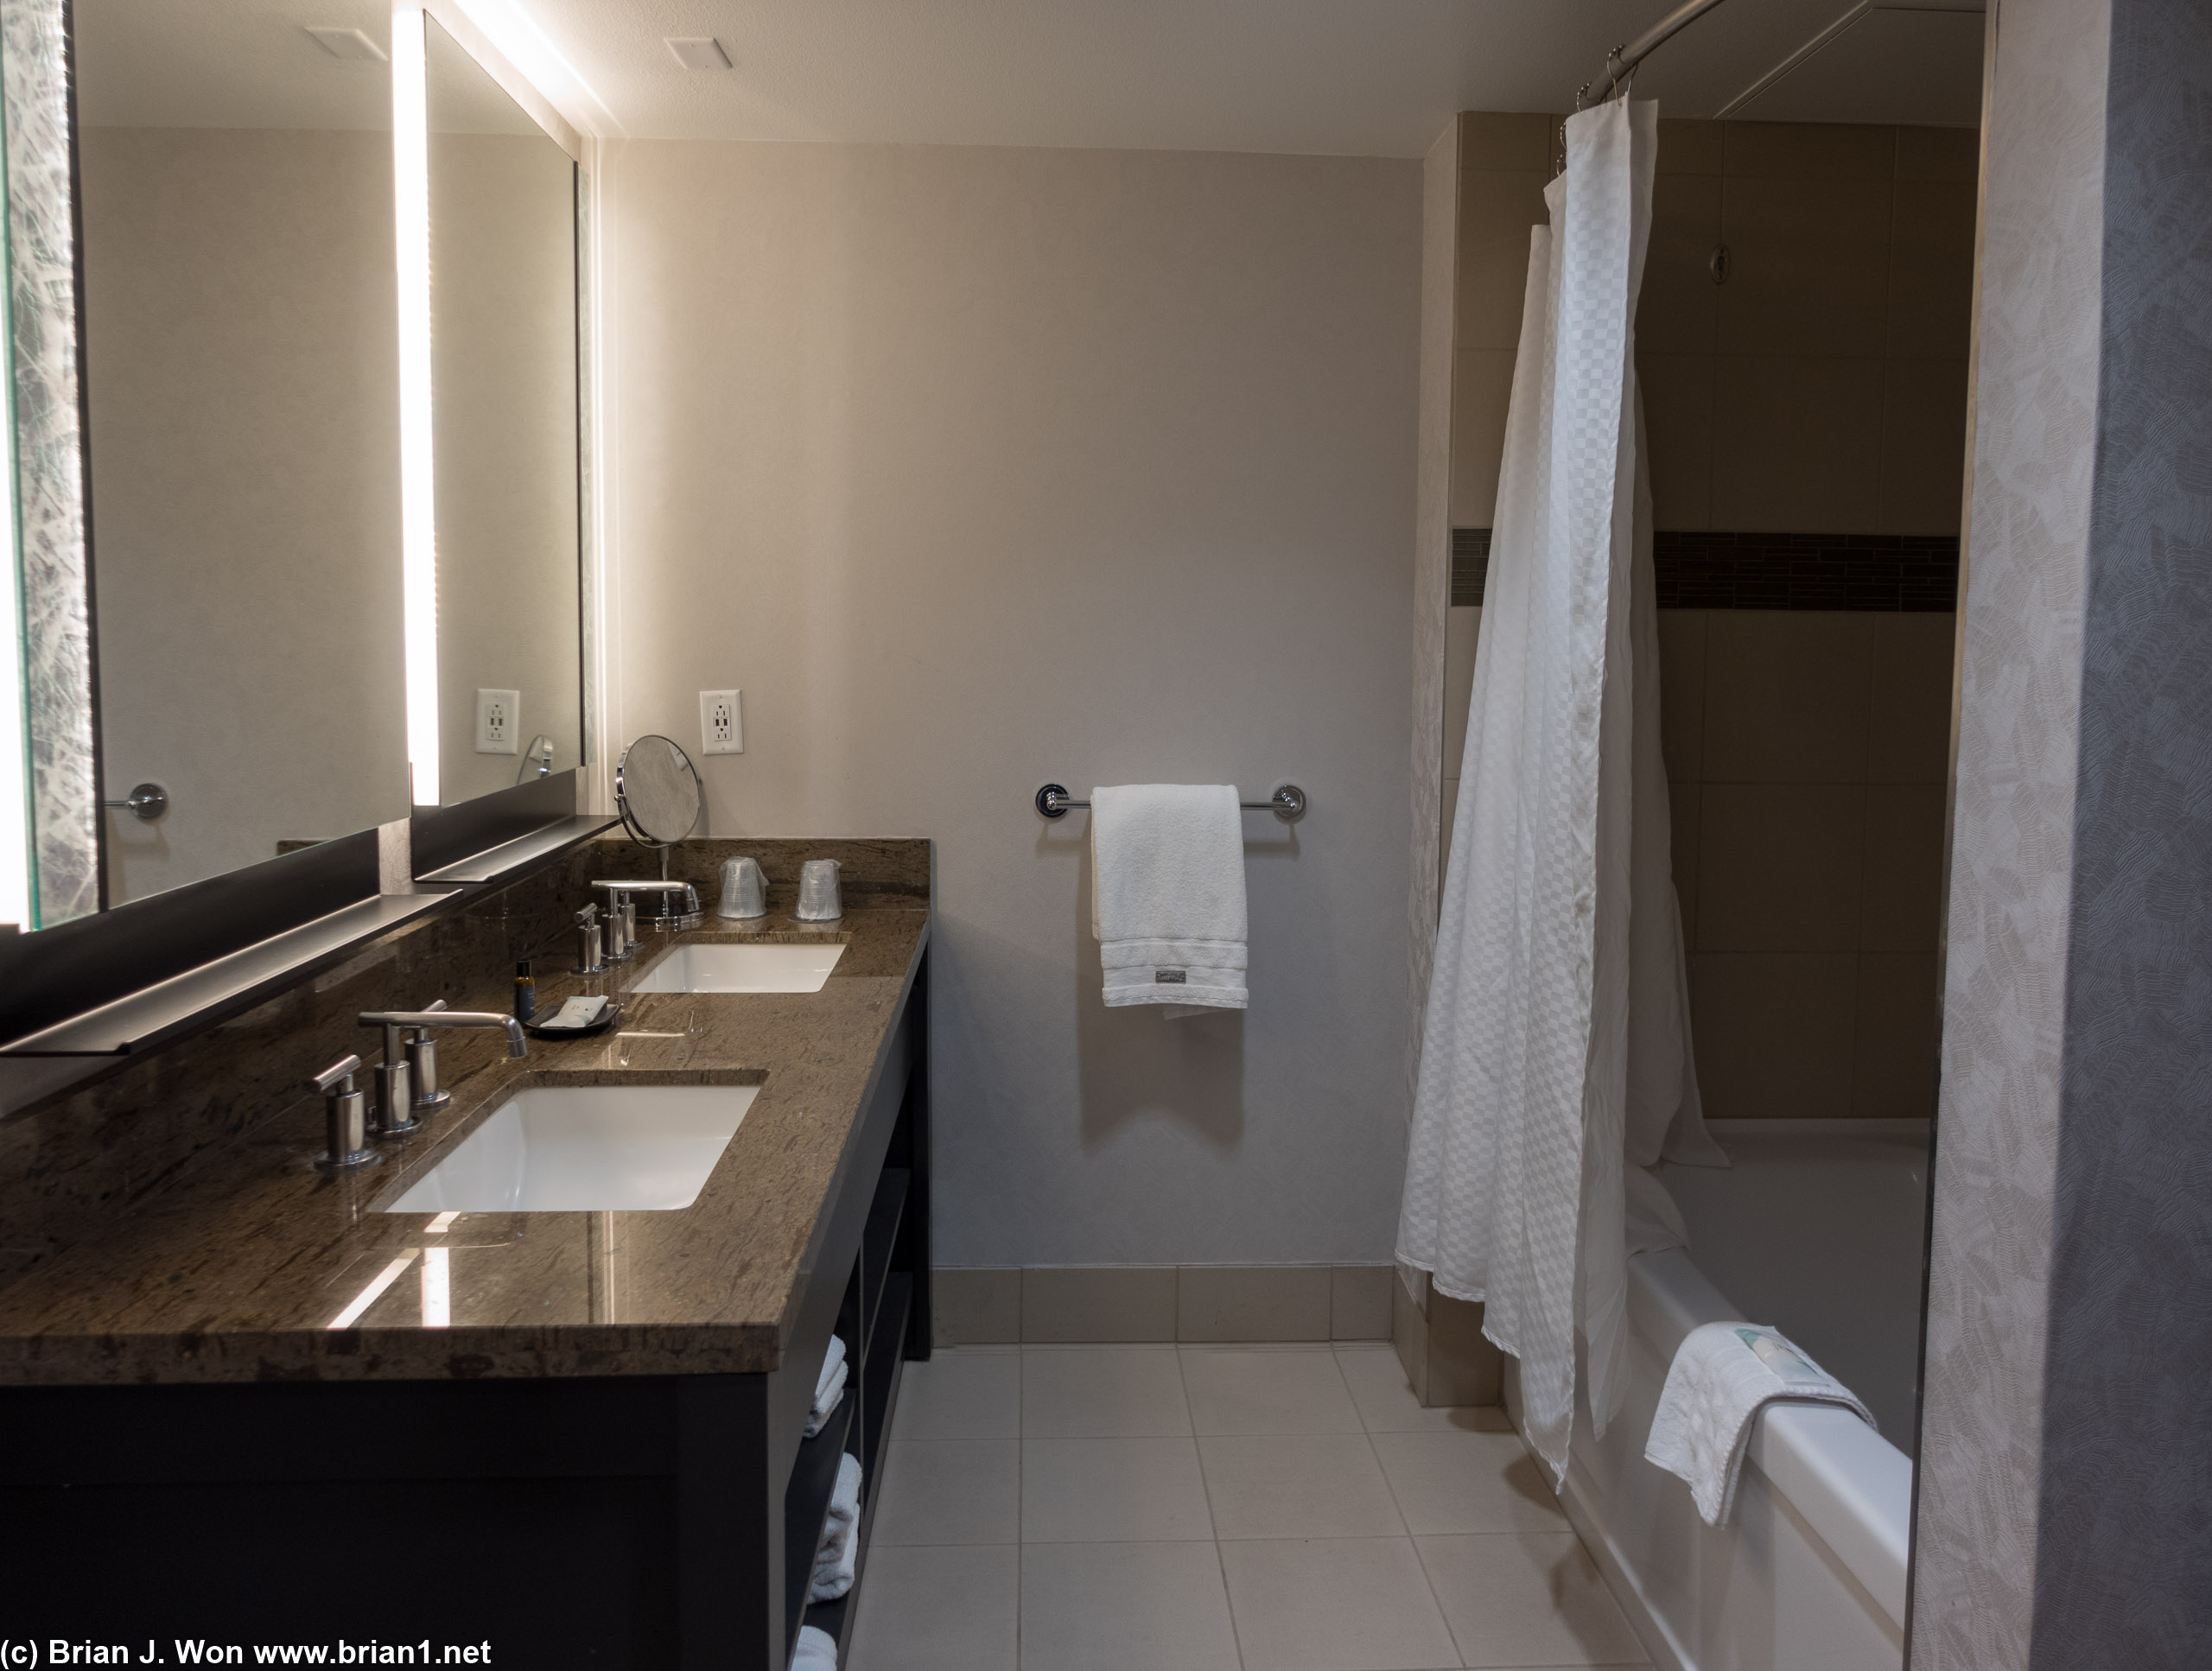 Bathroom in one of two 2-bedroom penthouse suites at the Westin Monache.